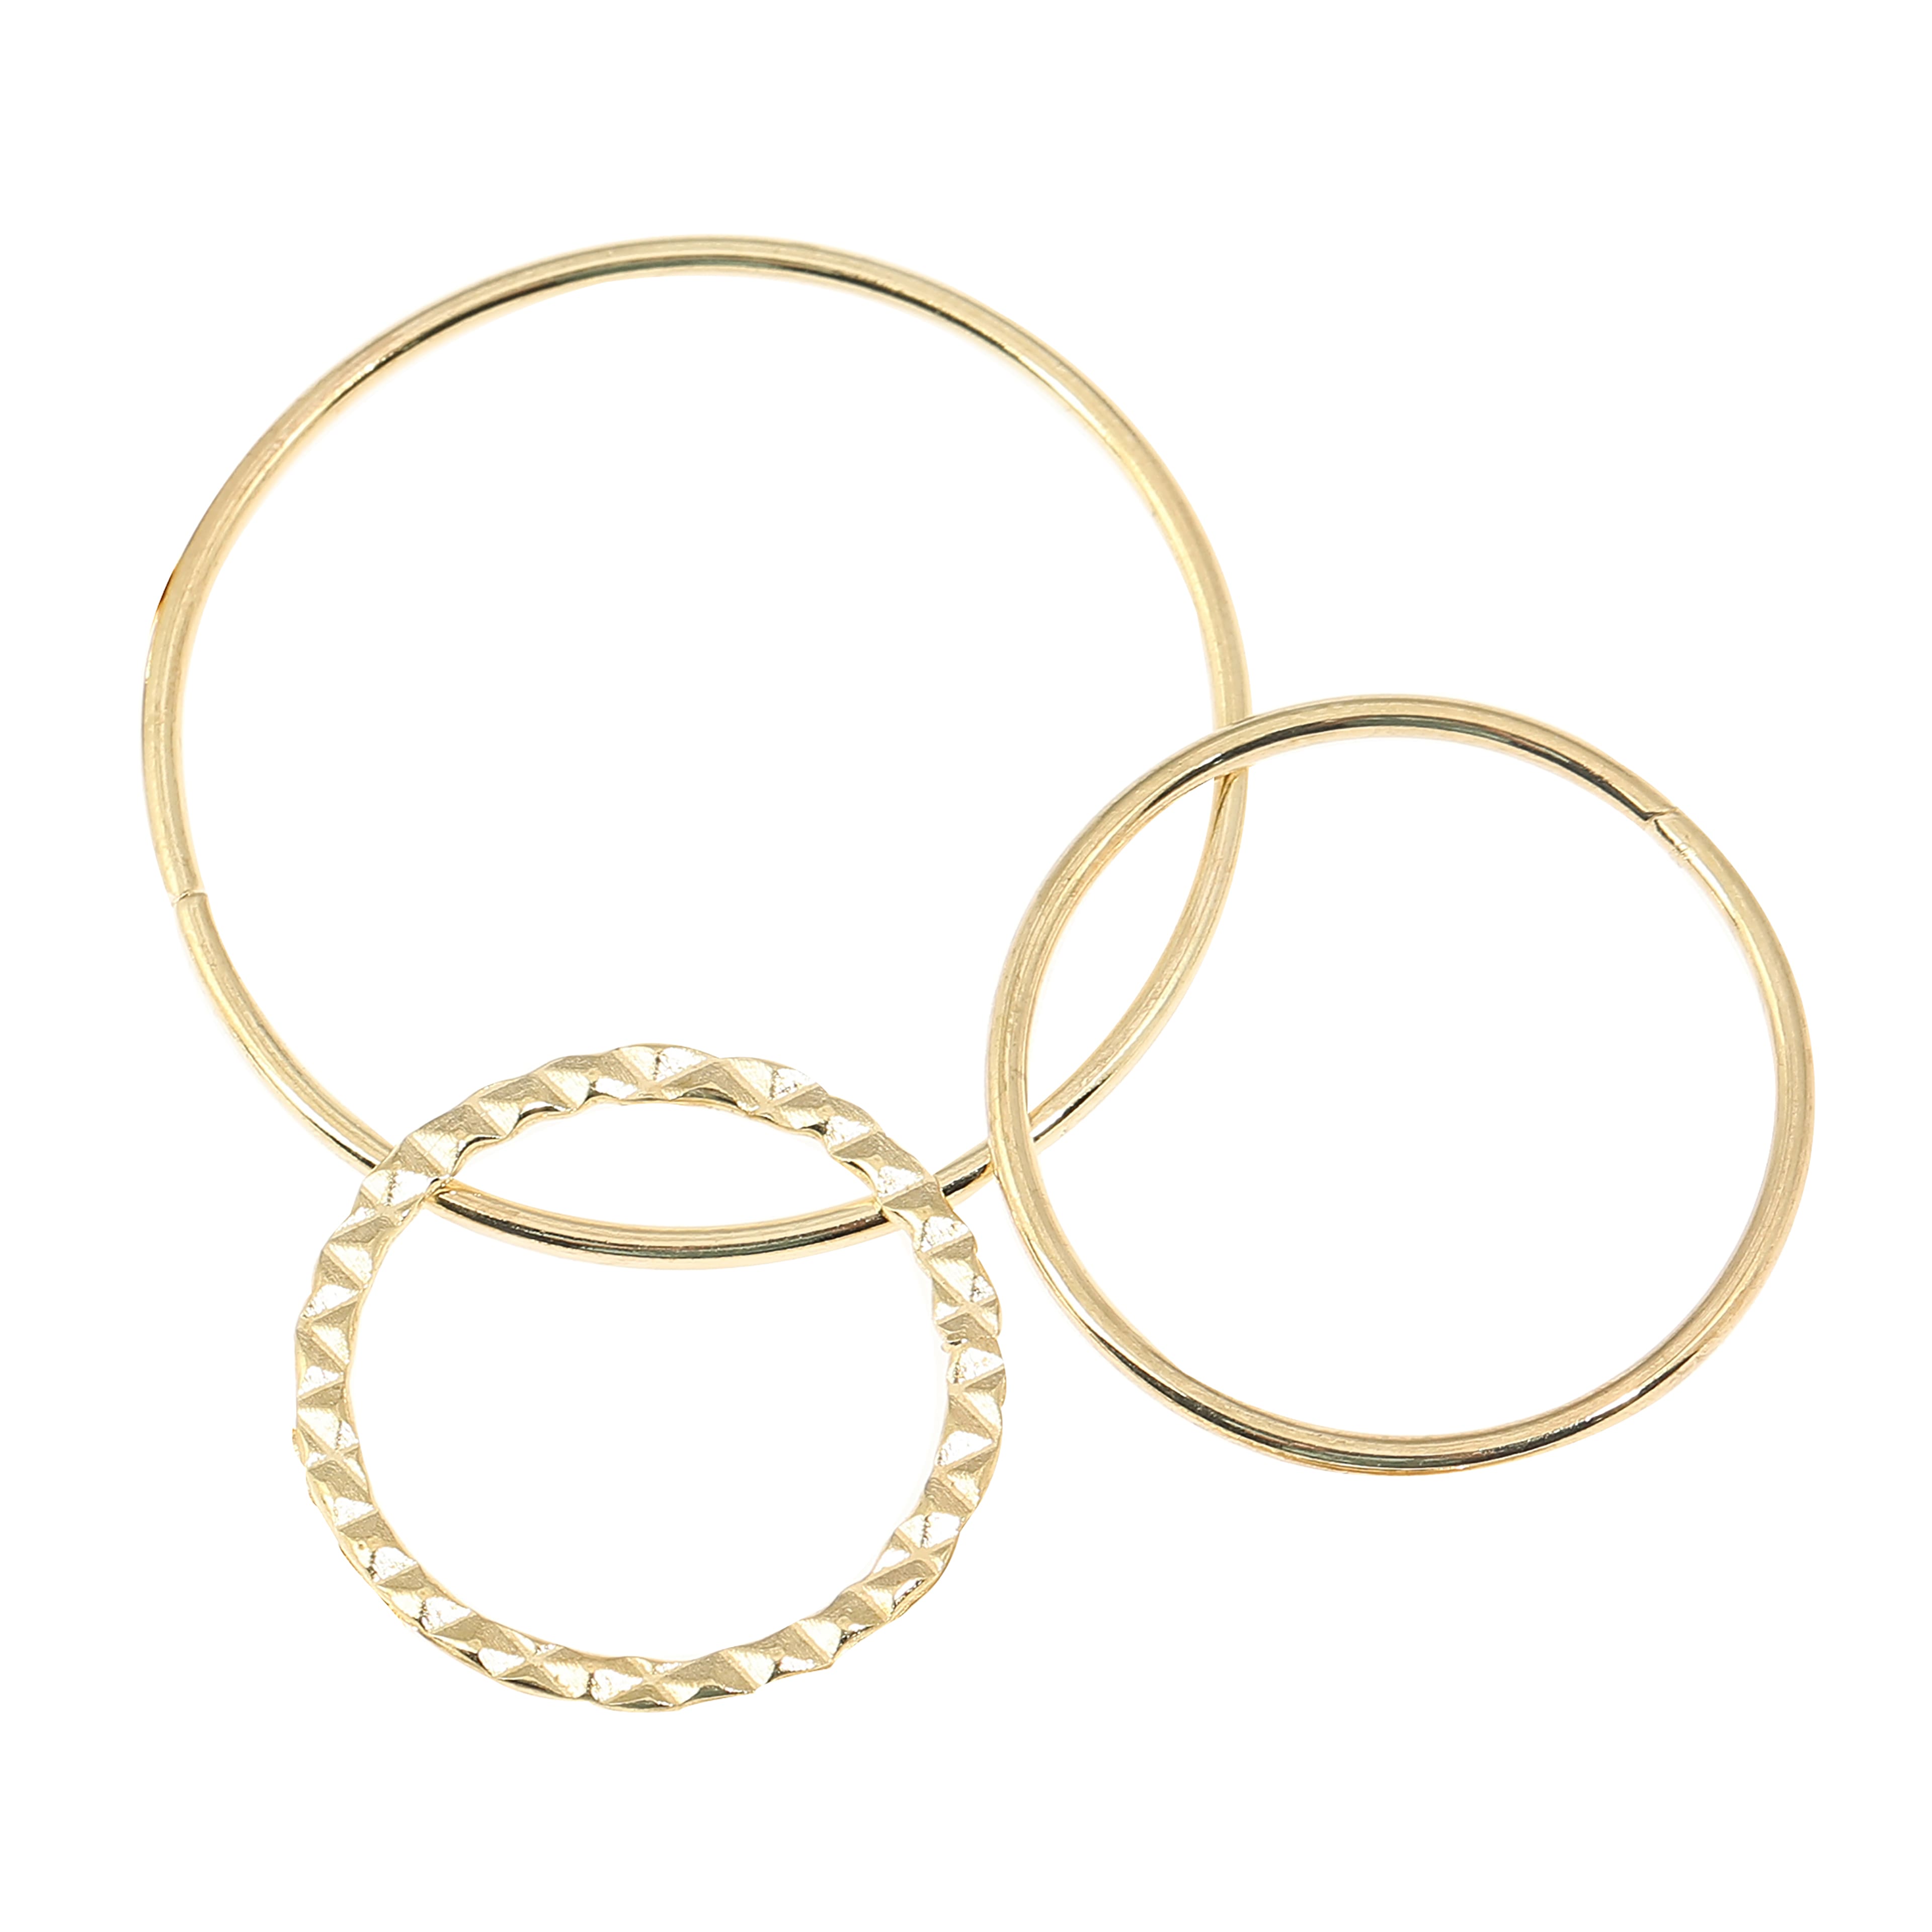 Assorted Gold Circle Connectors by Bead Landing&#x2122;